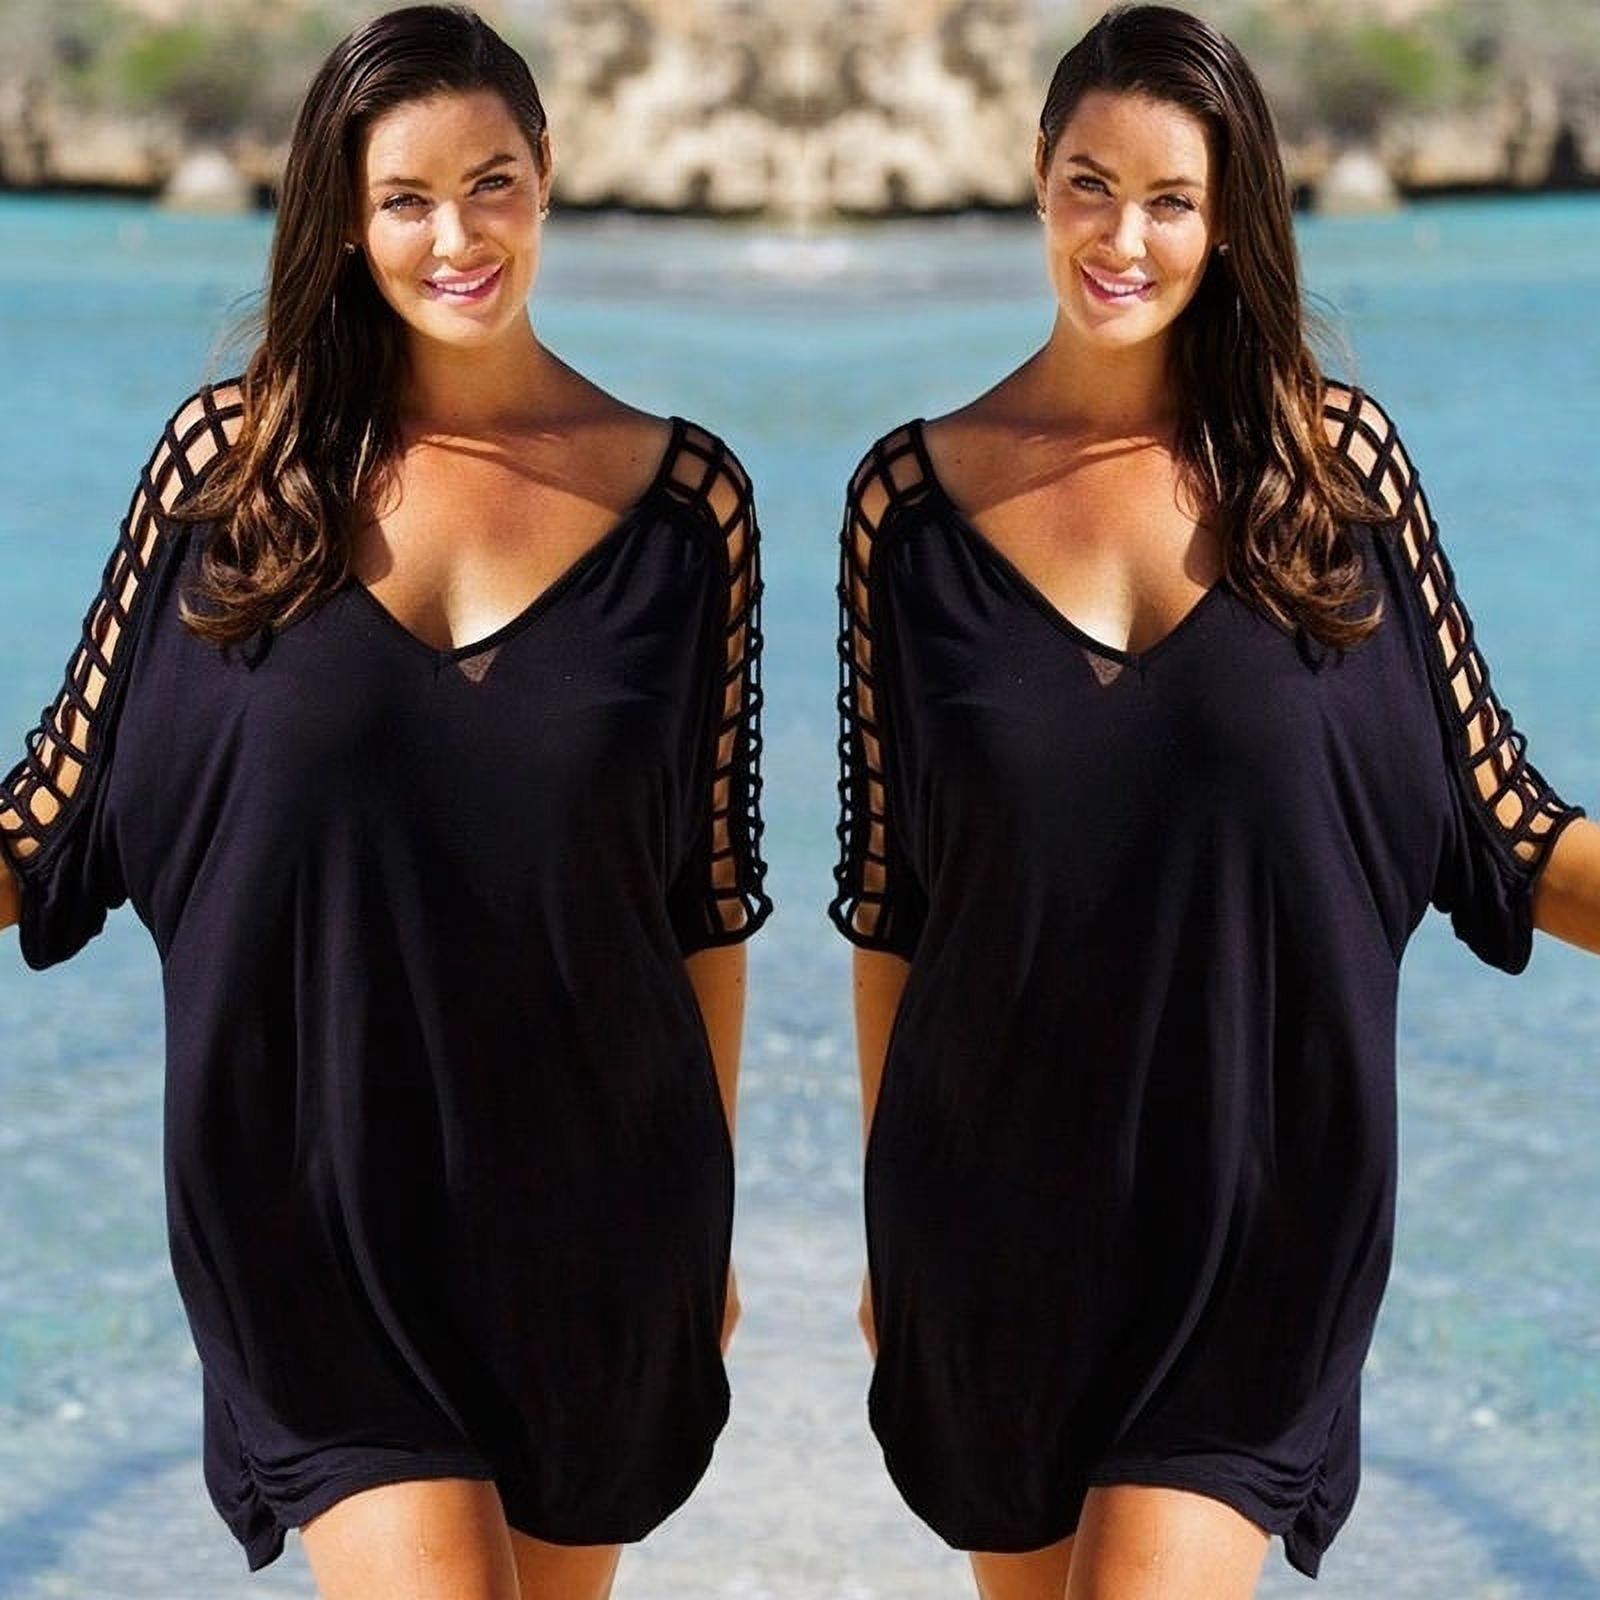 OP Size Medium 7-9 Blac Mesh Swimsuit Cover Up Dress Swimming Beach New Without 